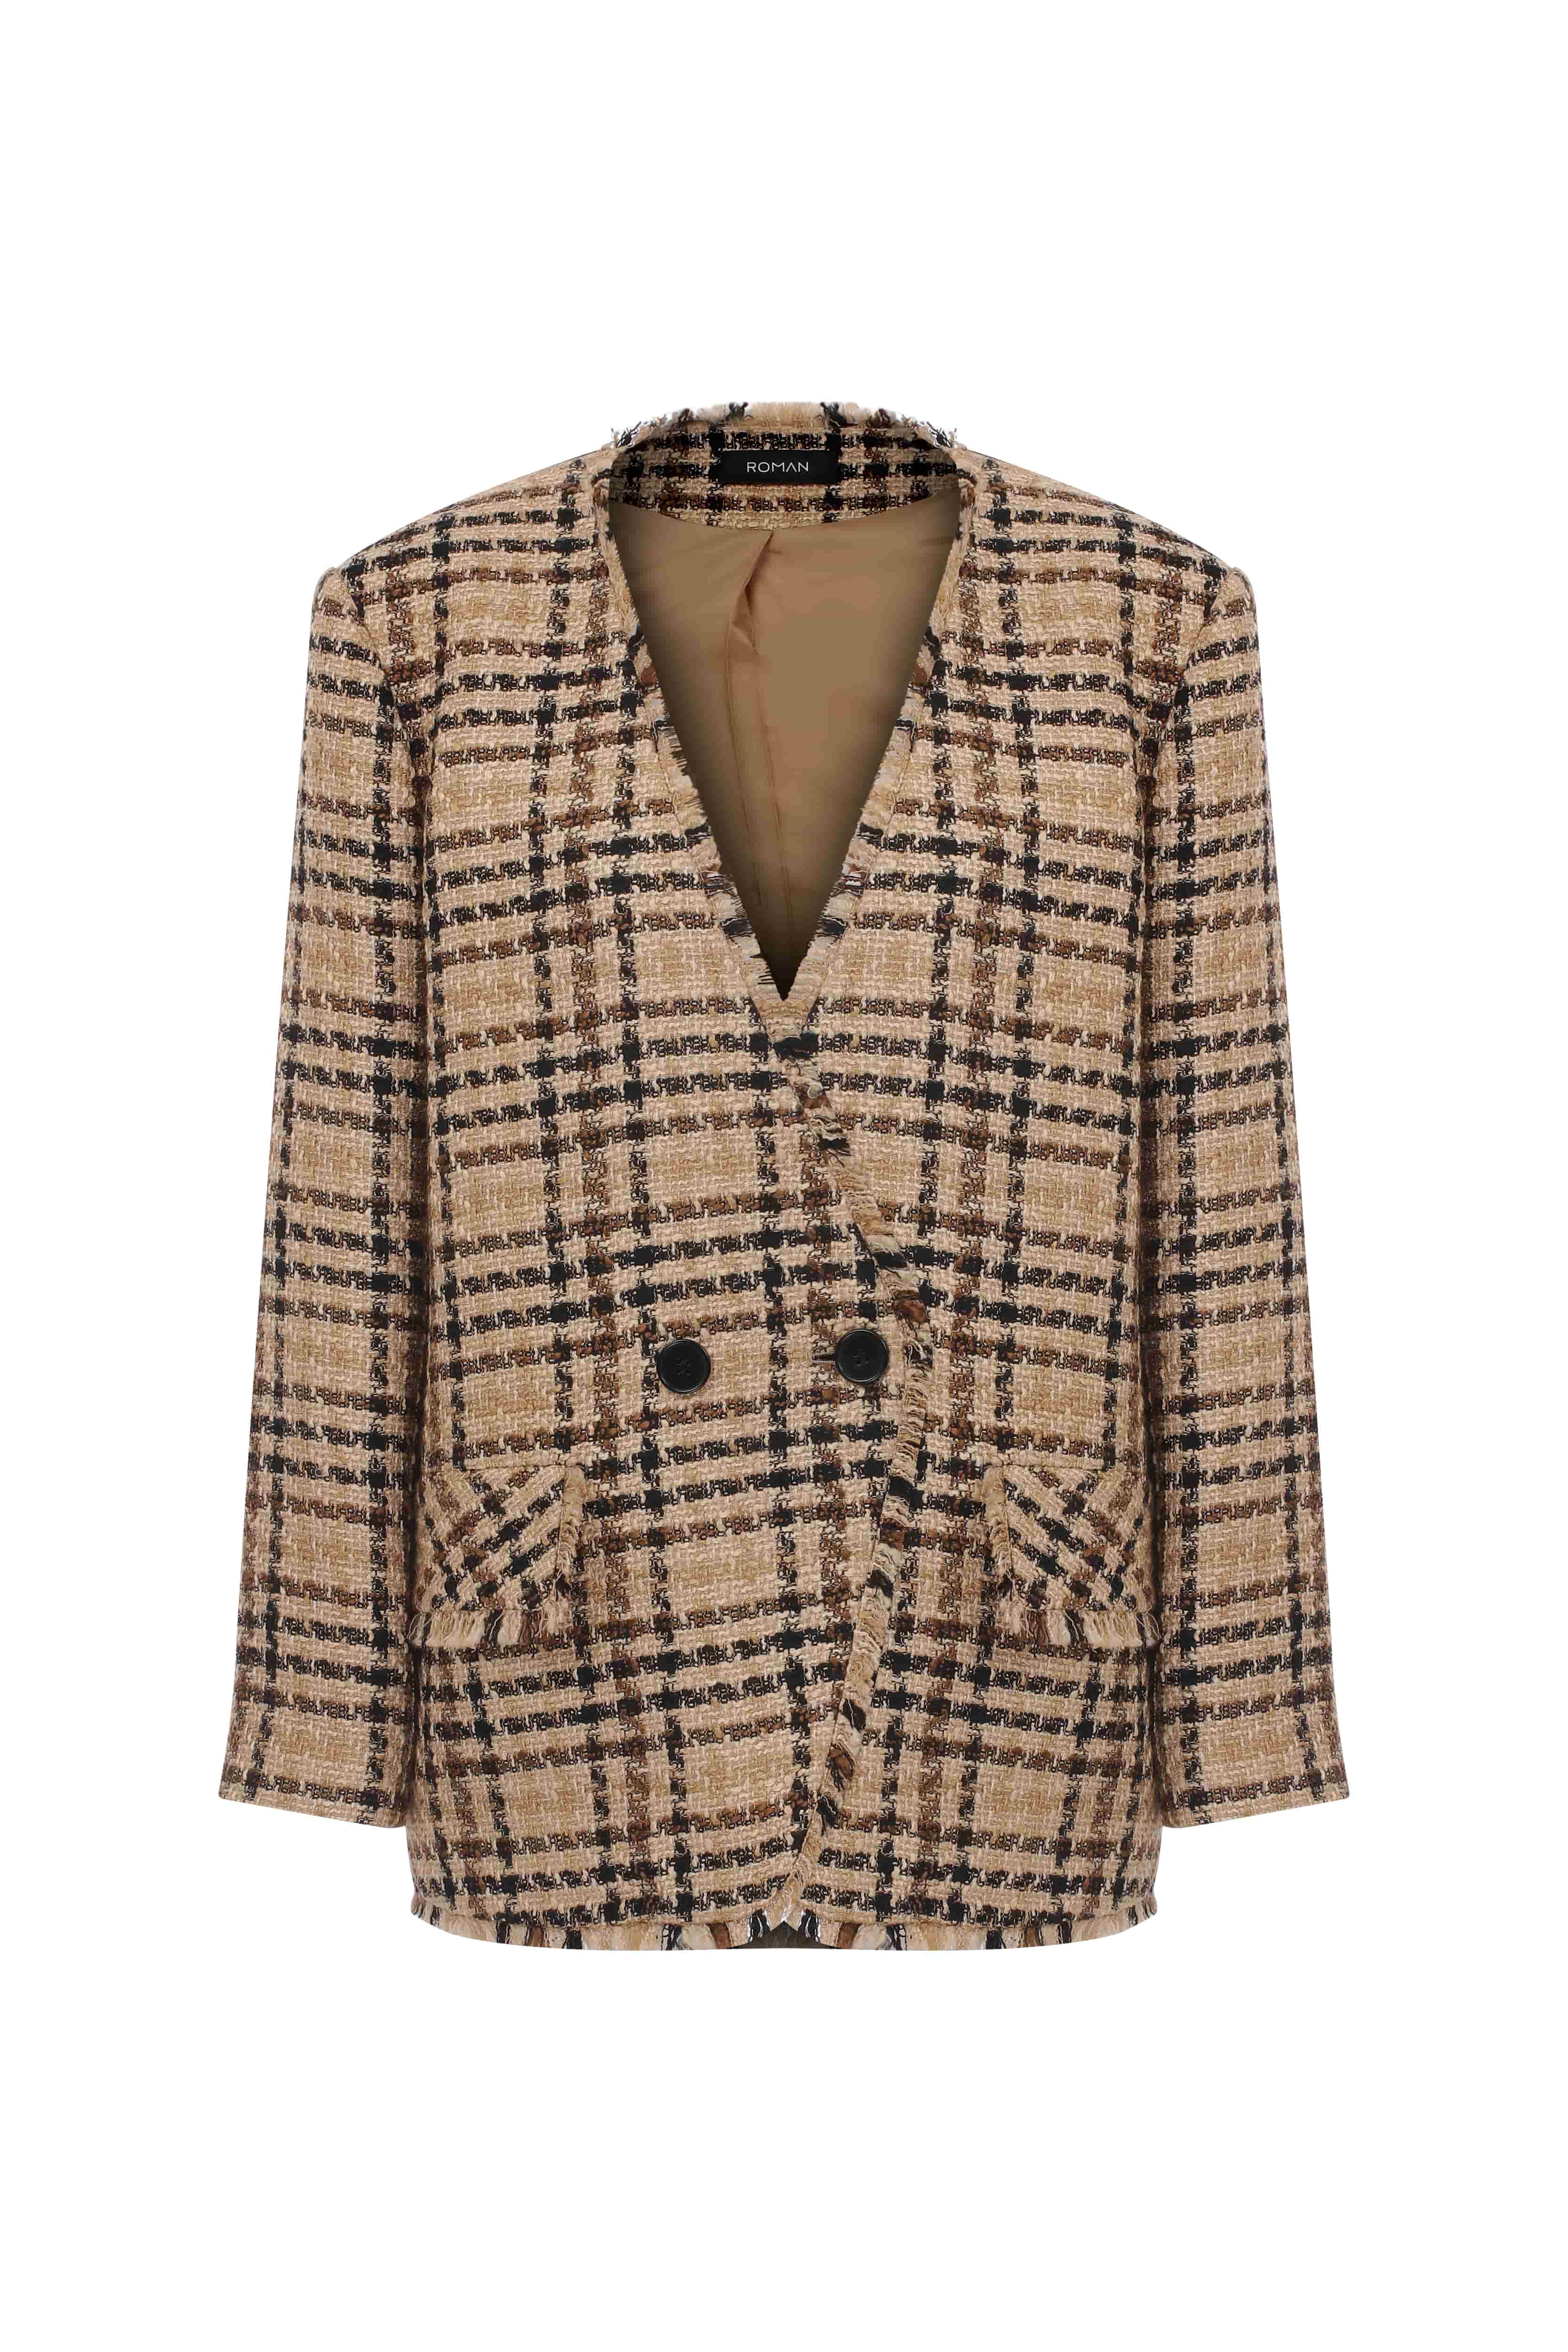 Roman Plaid Tweed Double Breasted Women's Jacket. 2